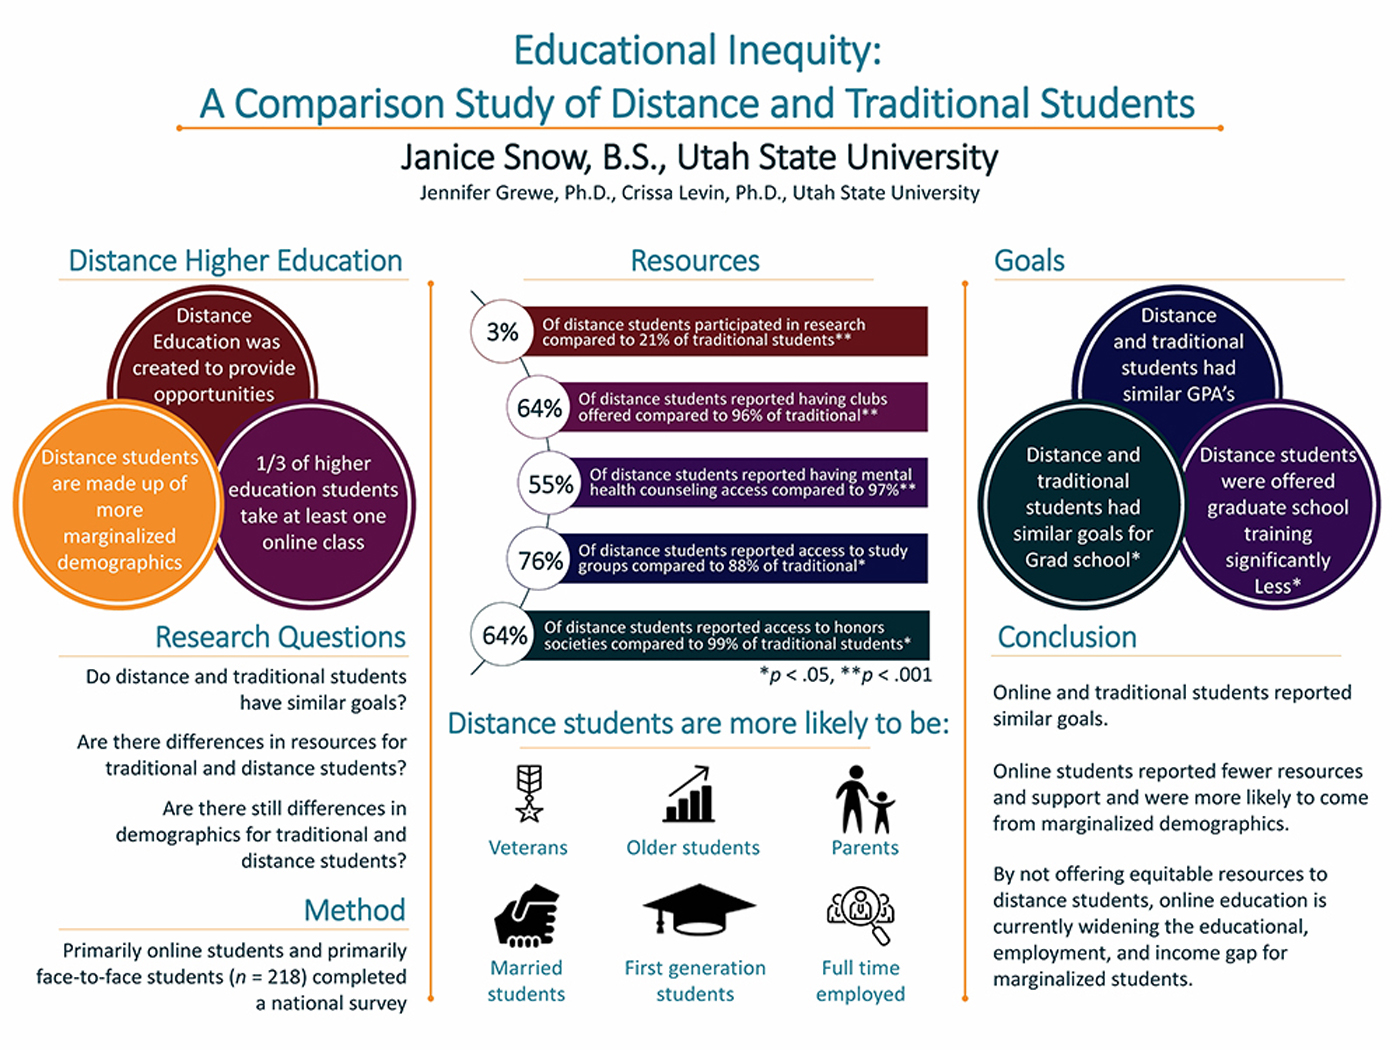 Educational Inequity: A Comparison Study of Distance and Traditional Students